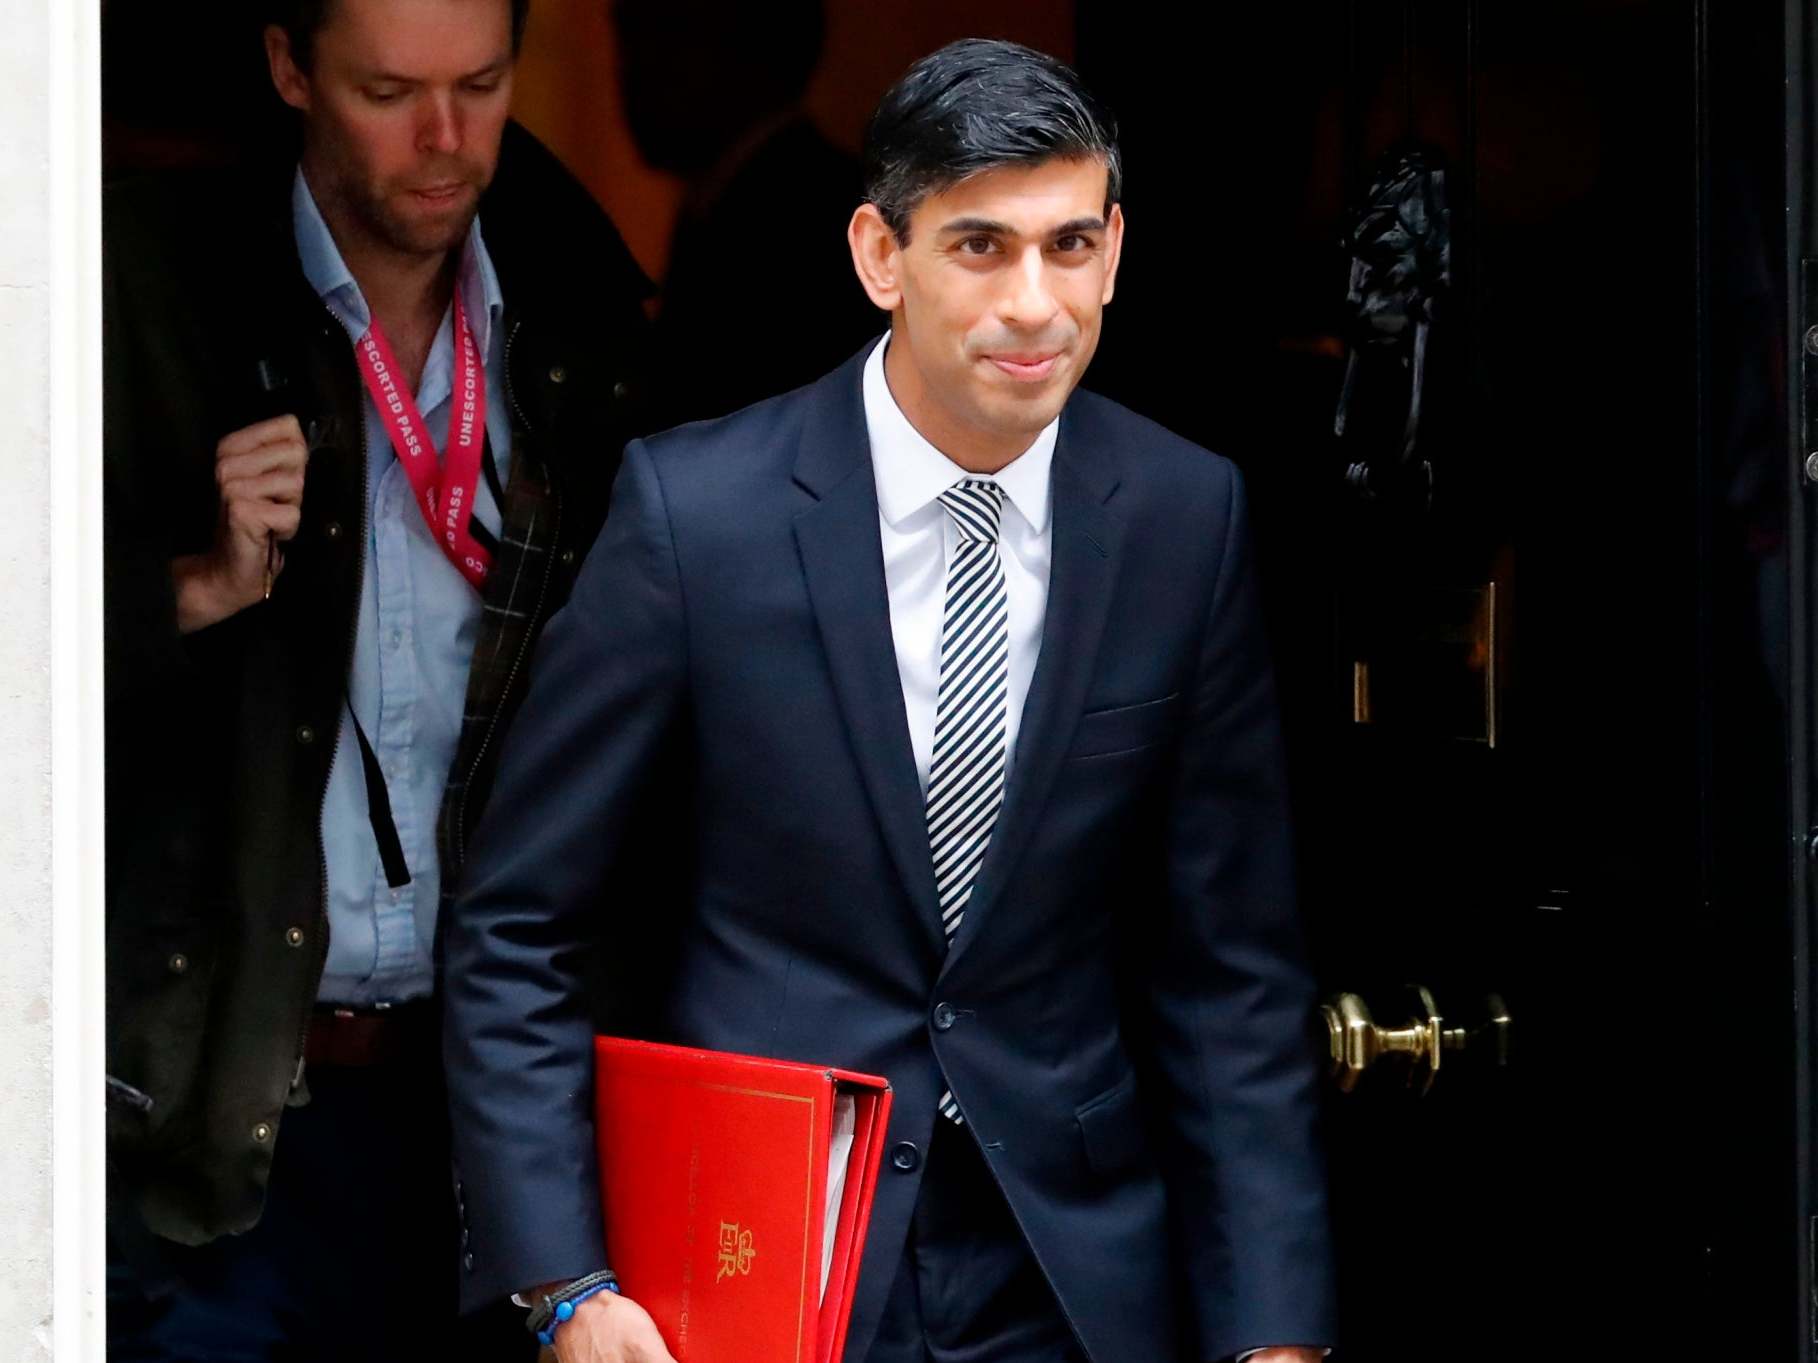 Government sources have said it is ‘highly unlikely’ the idea will feature in new chancellor Rishi Sunak’s first Budget on Wednesday